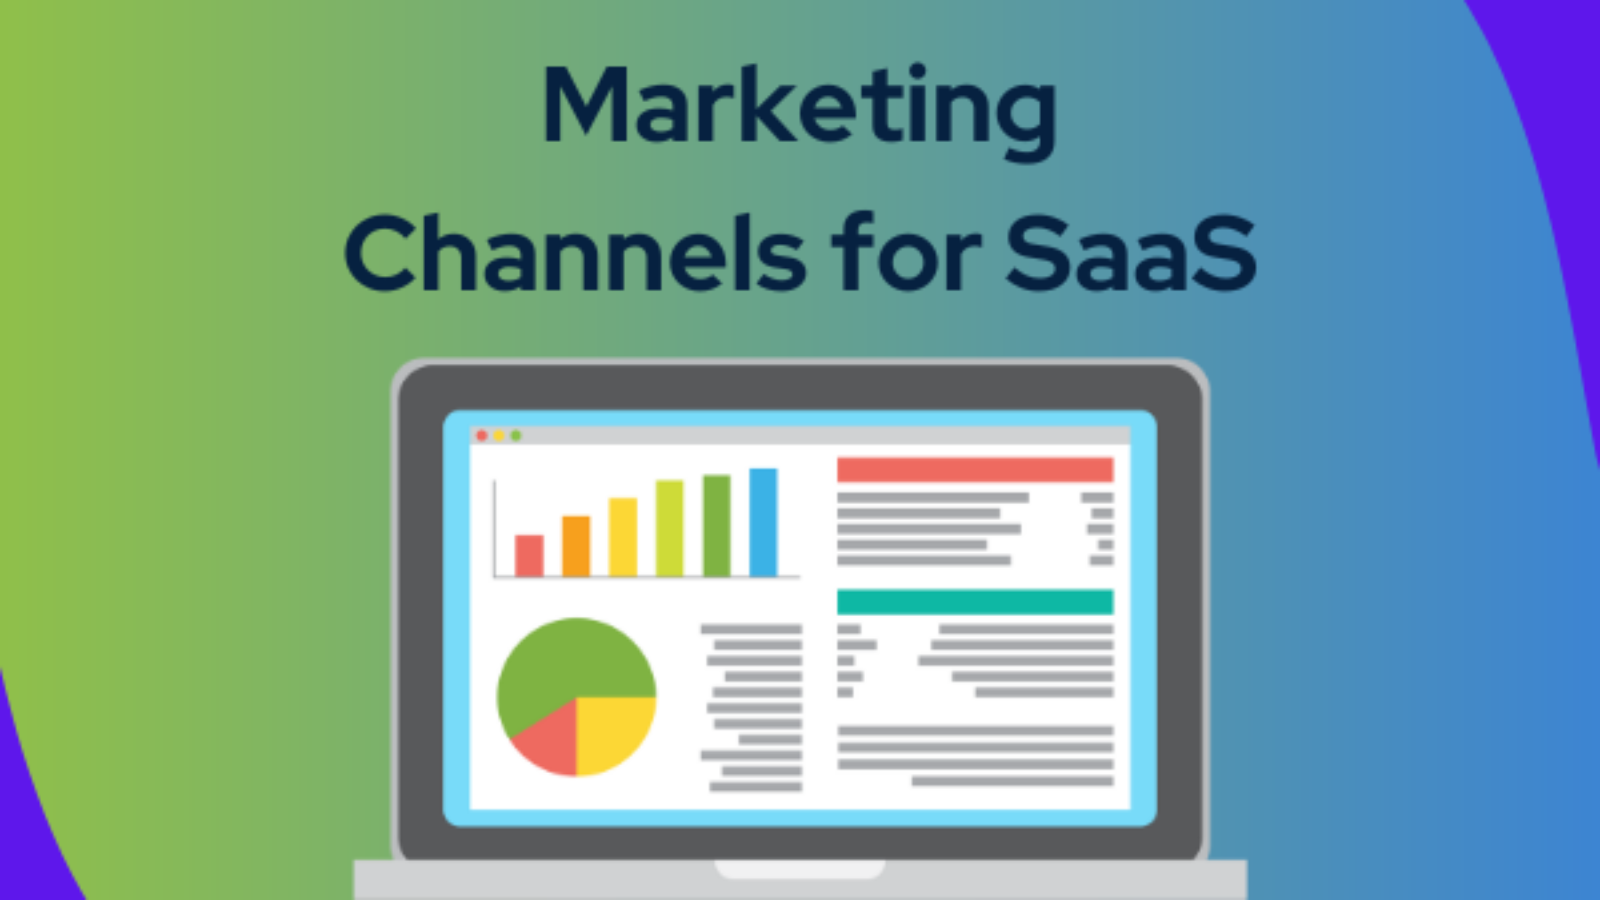 Marketing Channels for SaaS